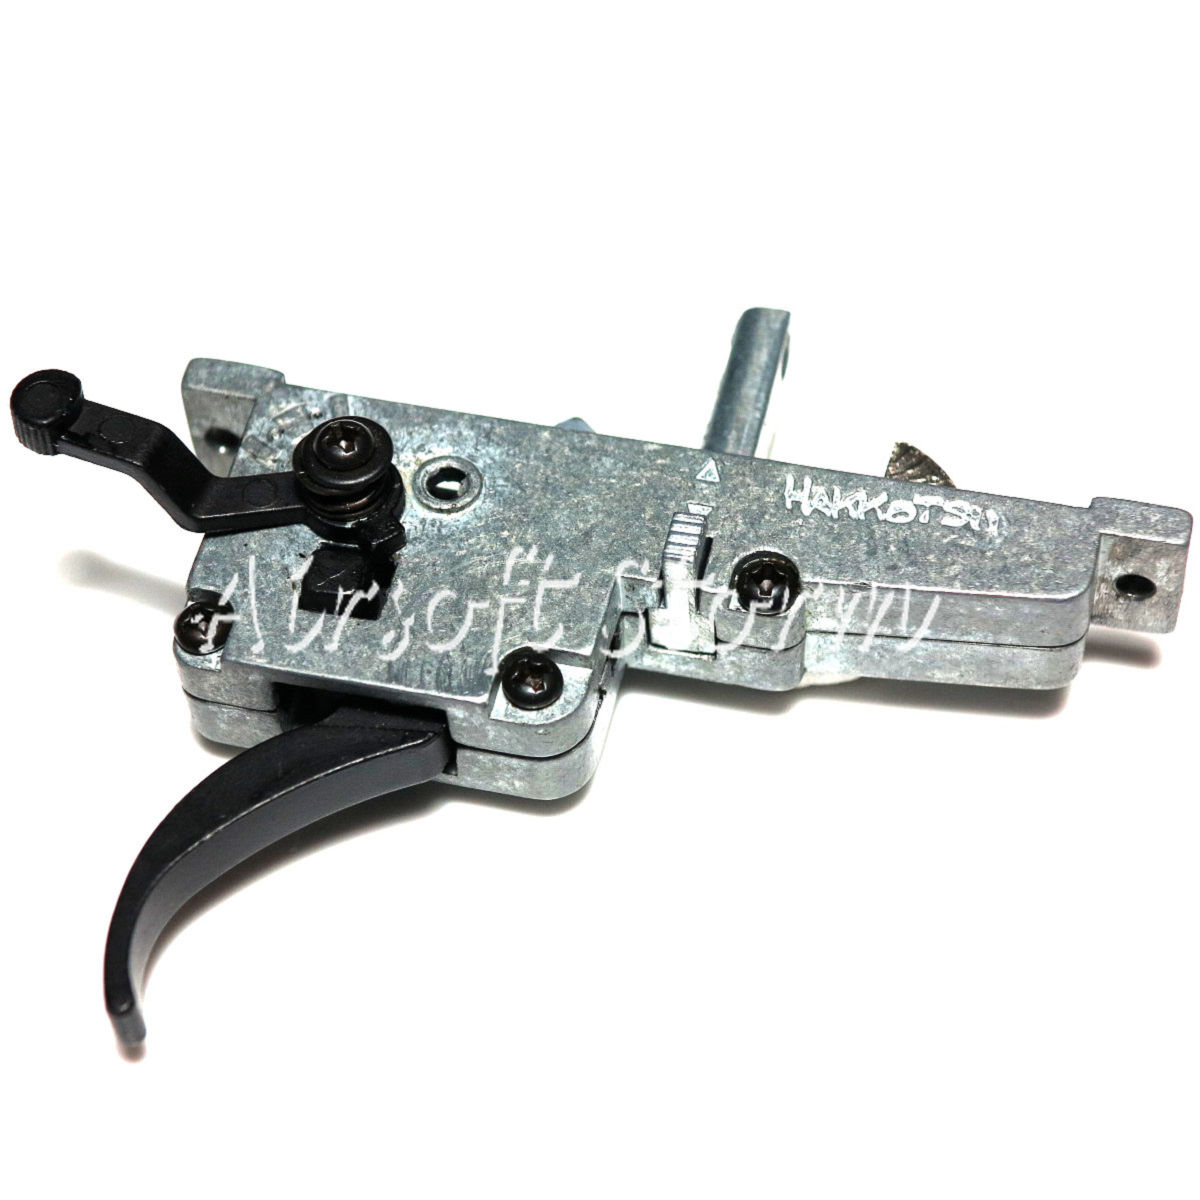 AEG Gear Hakkotsu Trigger Assembly for APS APM40 Airsoft Sniper Rifle